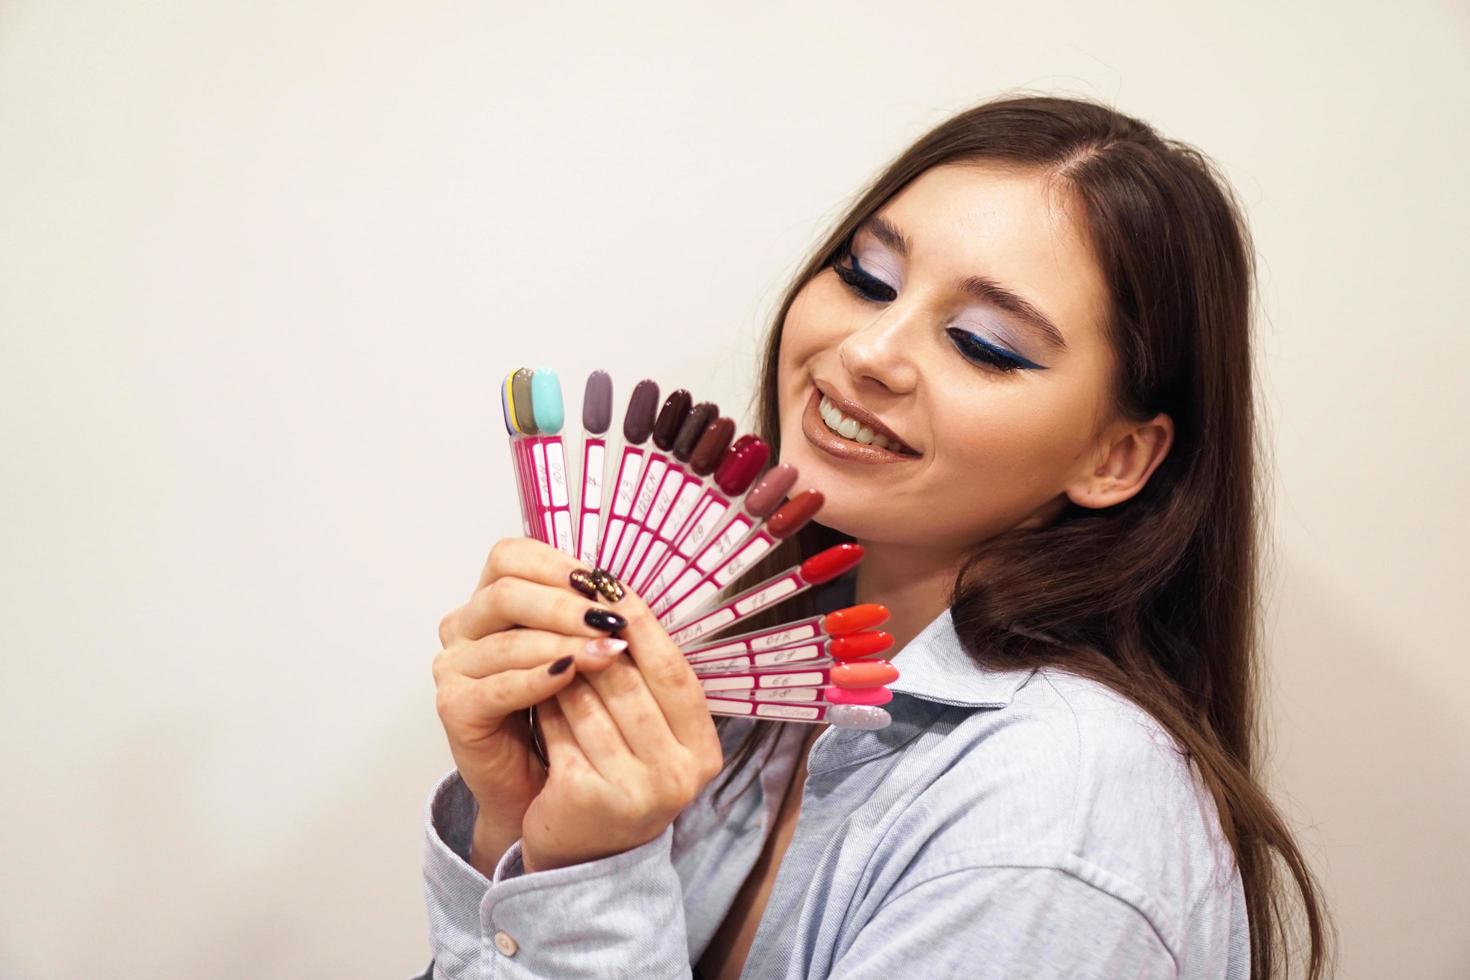 Woman smiling, holding a manicure and pedicure nail polish palette photo